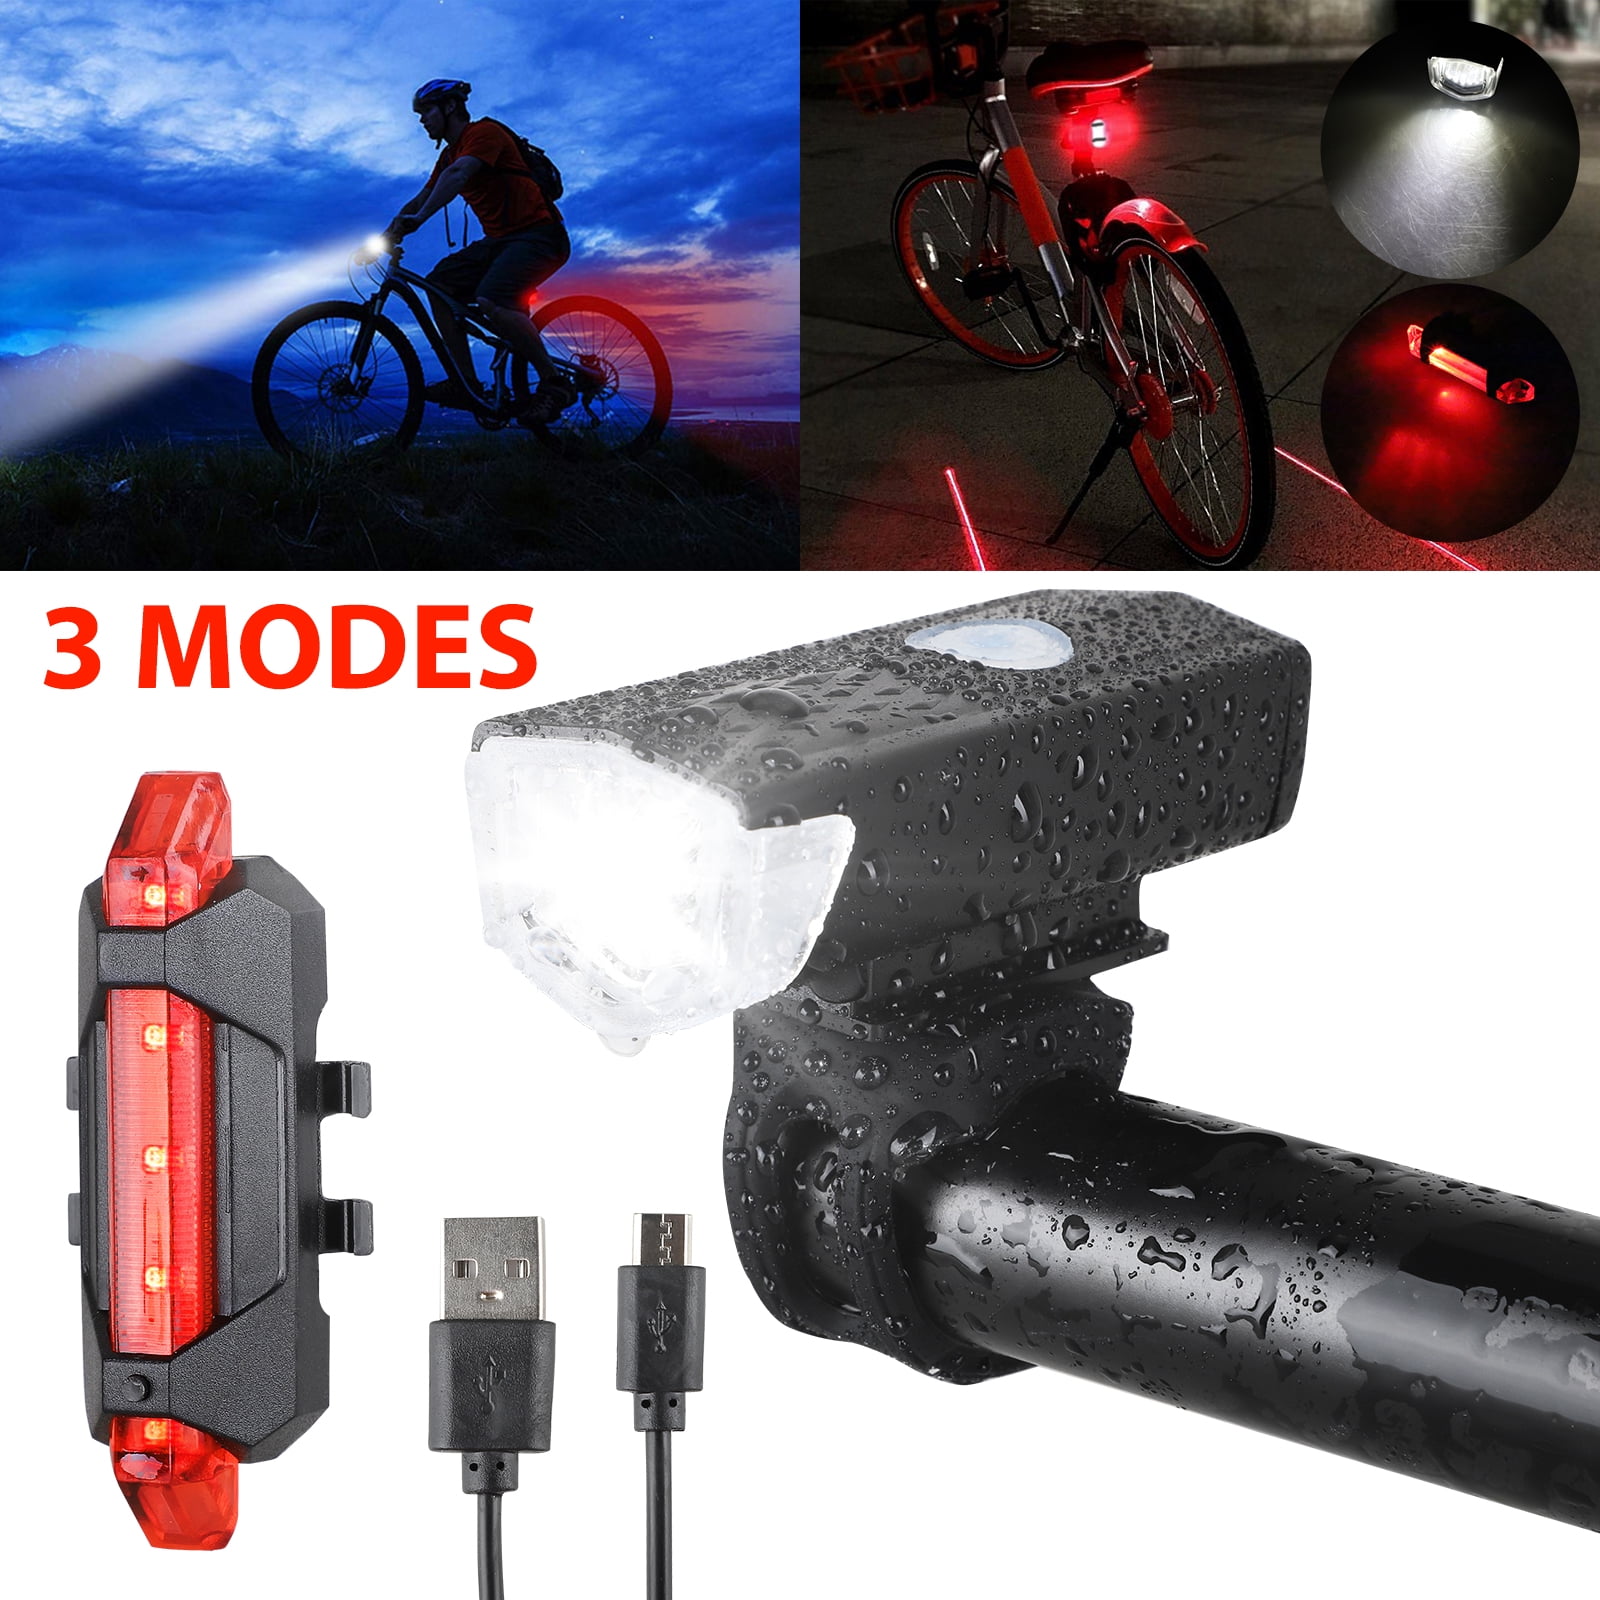 Super Bright LED Bicycle Light Night Ride Safe Cycling Waterproof Light 3Modes